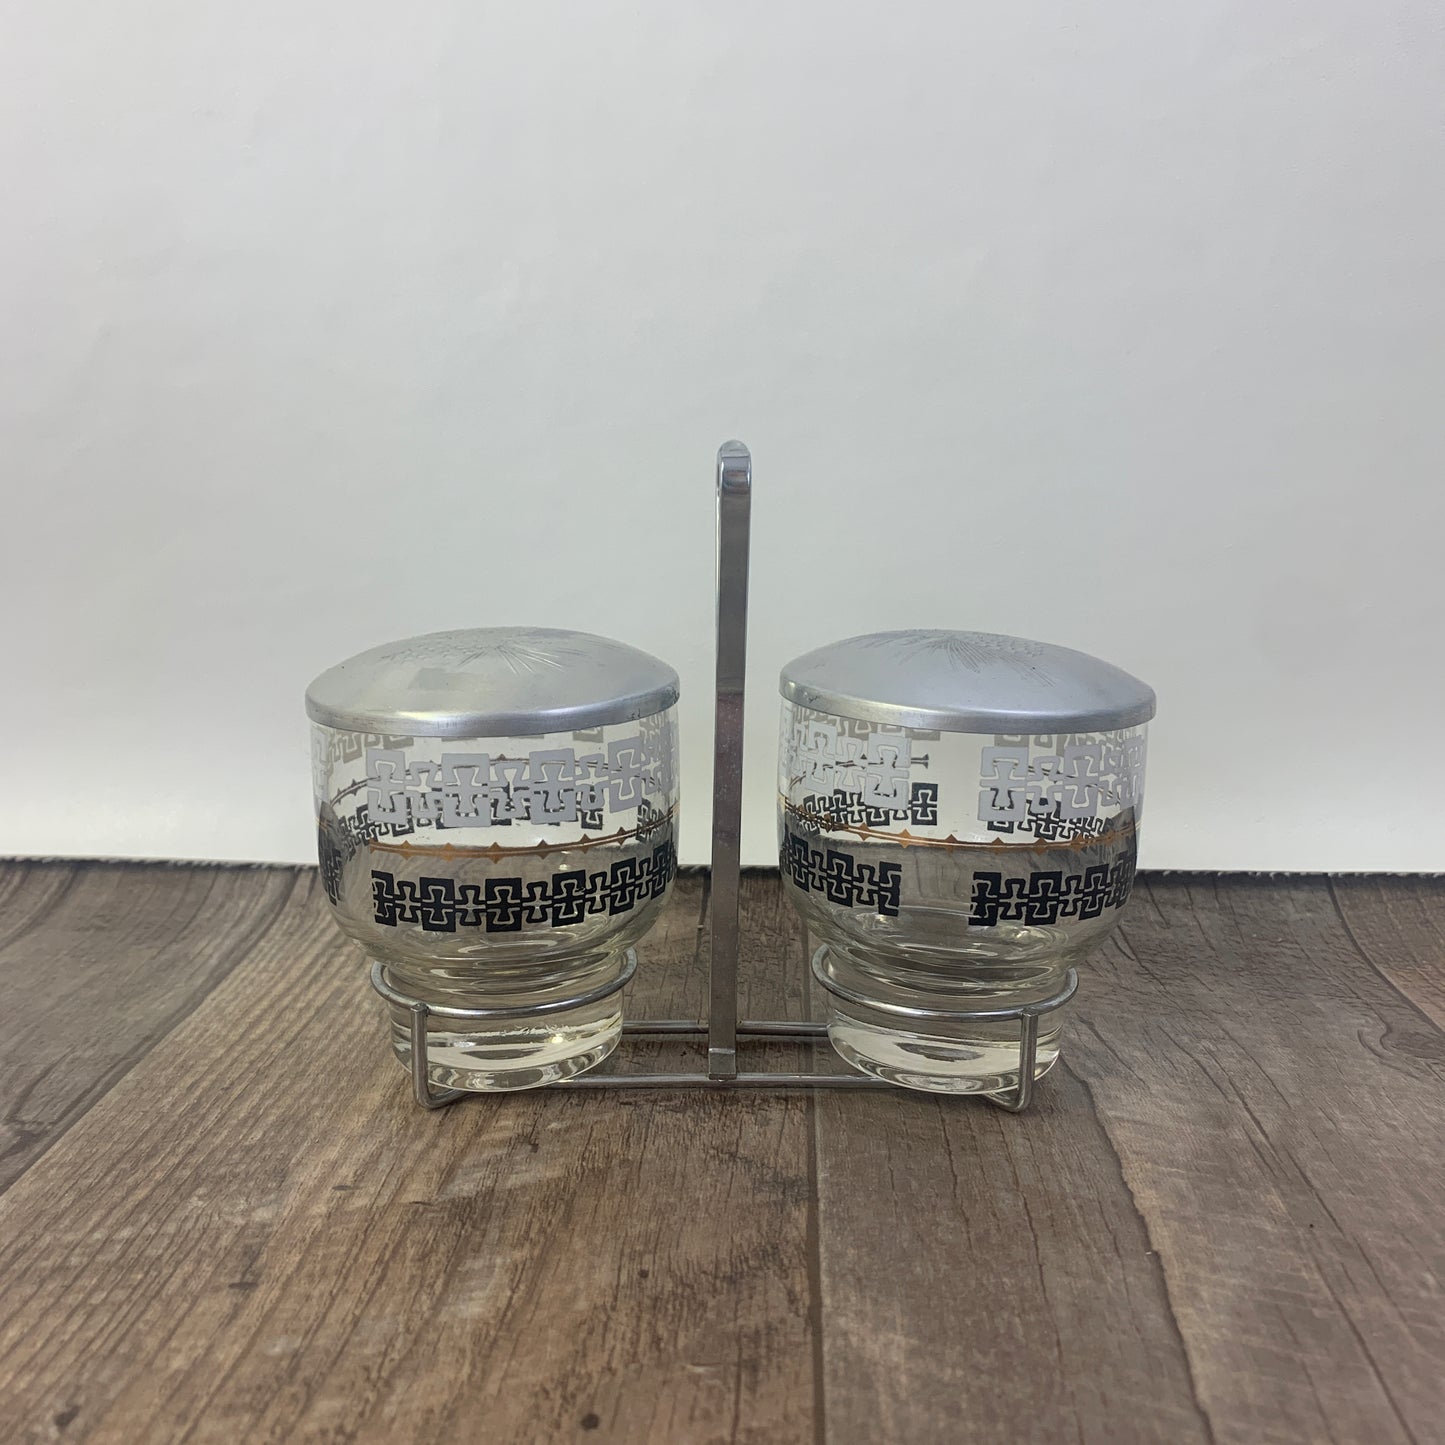 Lidded Condiment Container with Lids, Mid Century Glass Serving Dish for Condiments